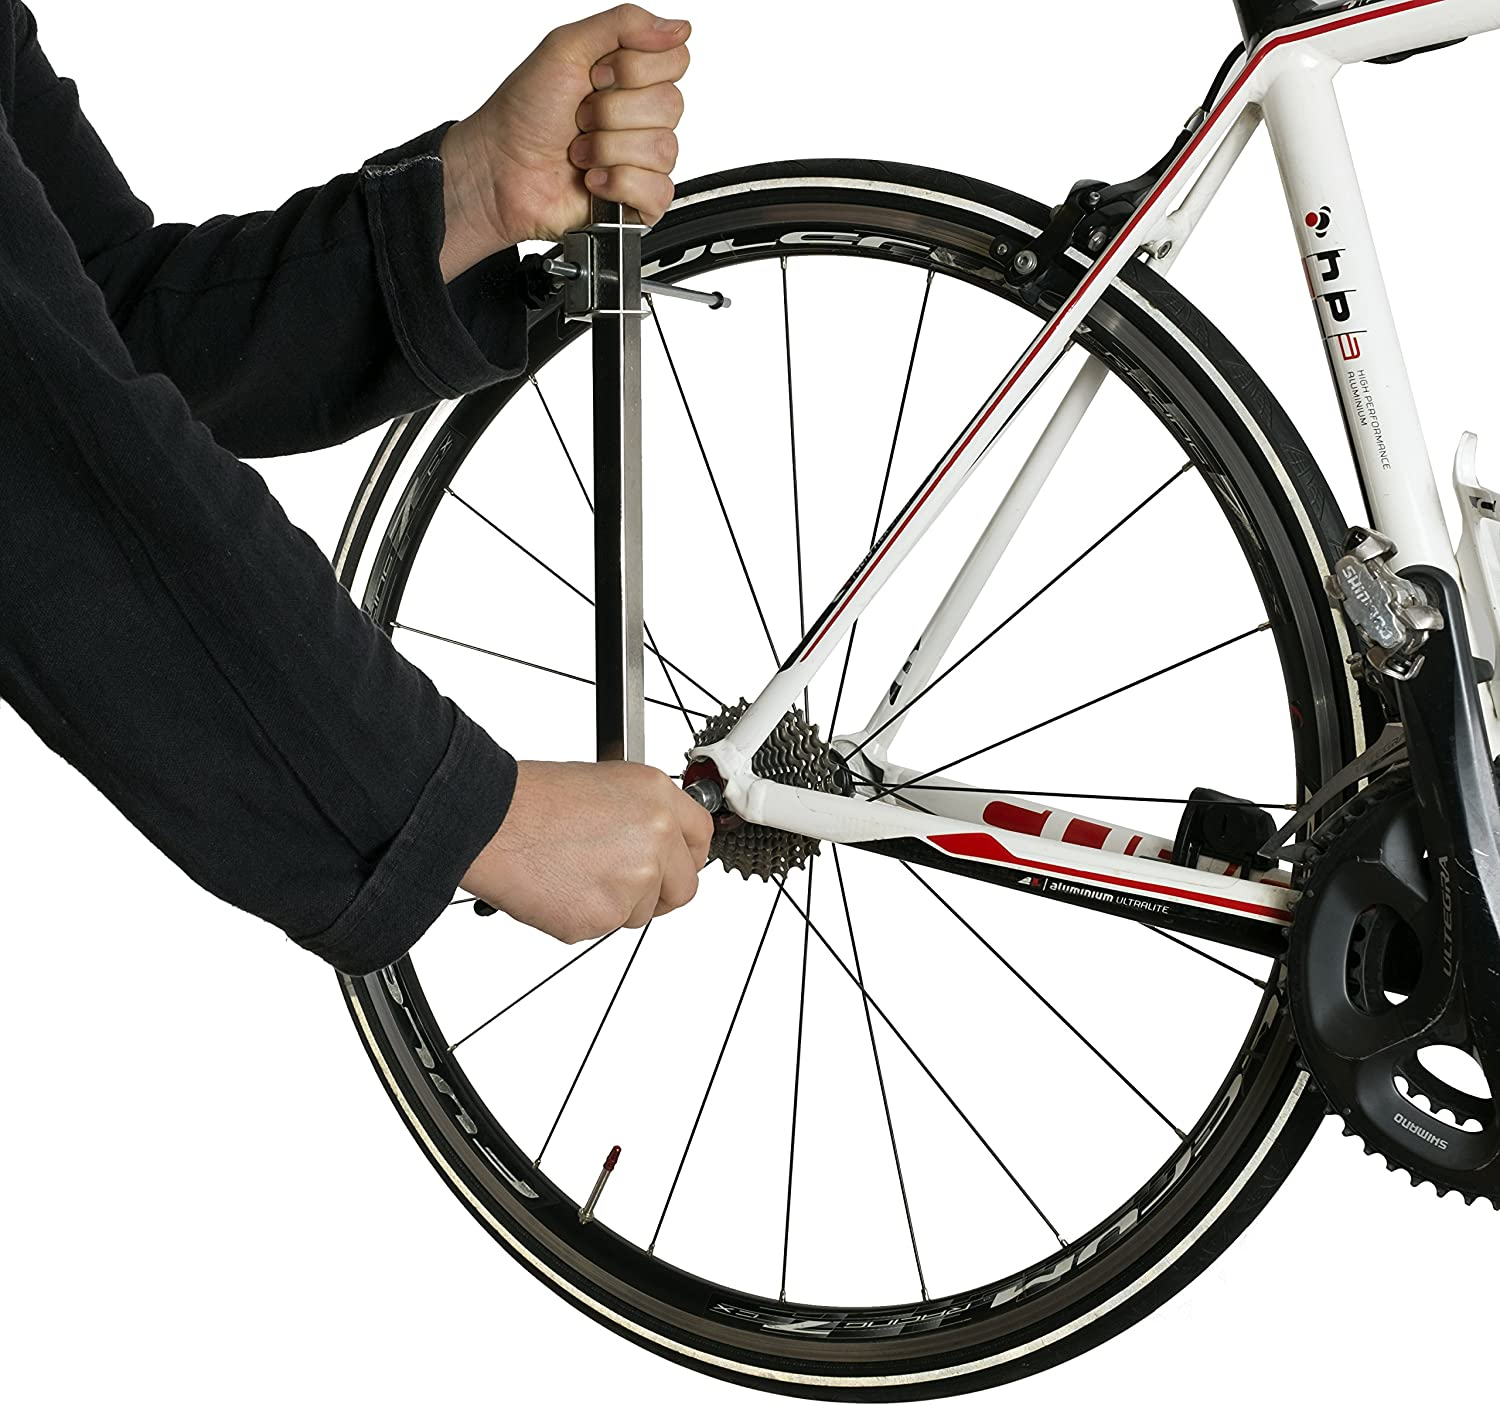 To fix a derailleur hanger, simply use an alignment gauge like this.